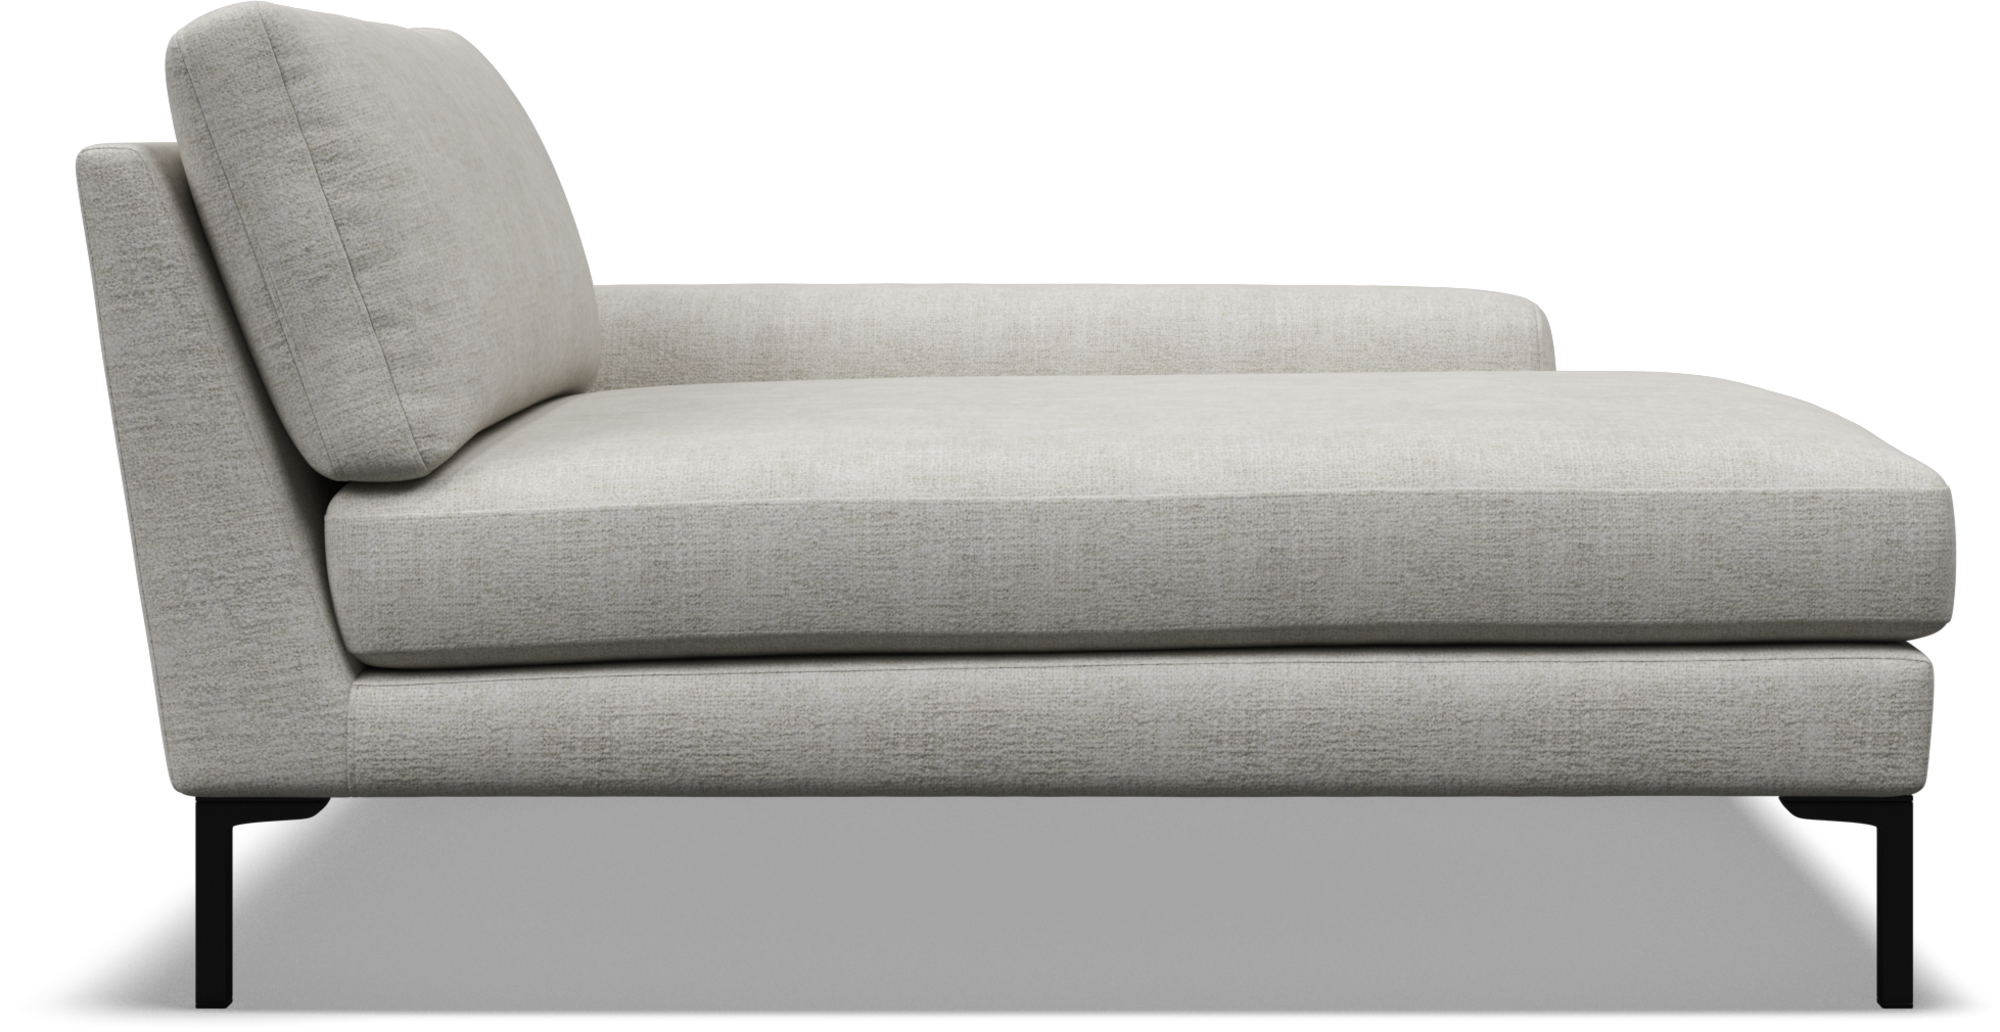 Sussex chaise